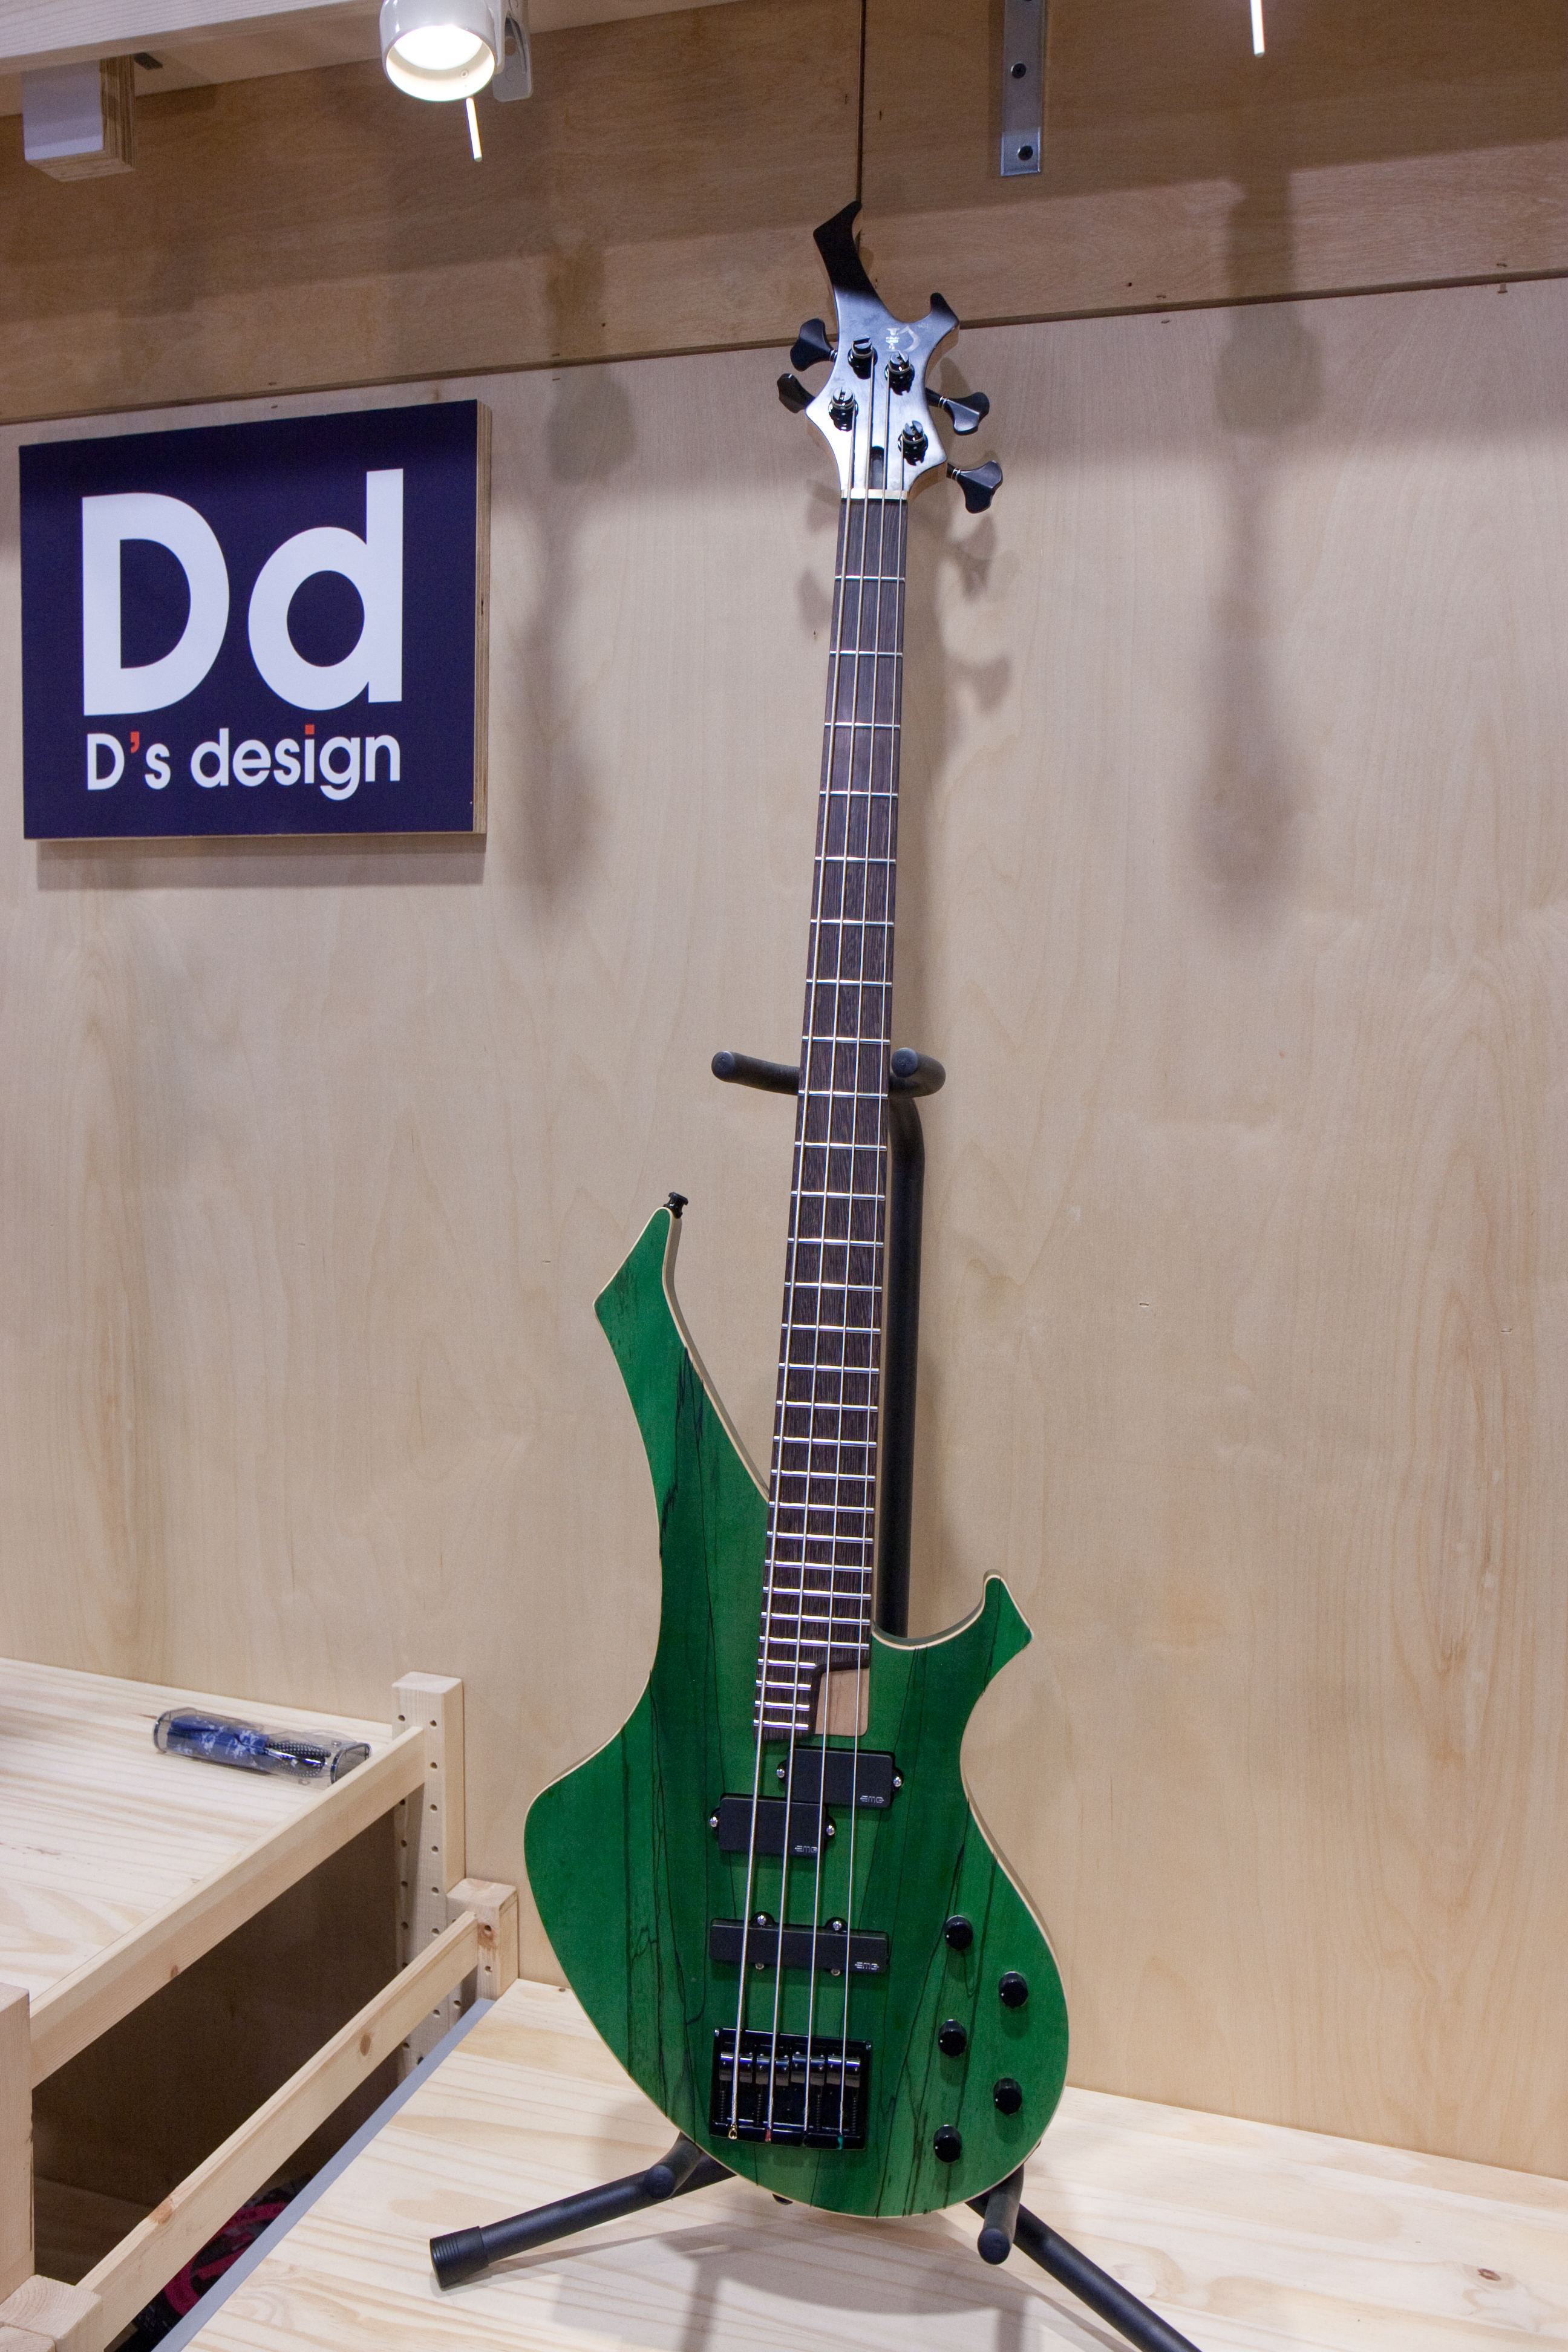 D’s design DB-1 ”Insect Bass”